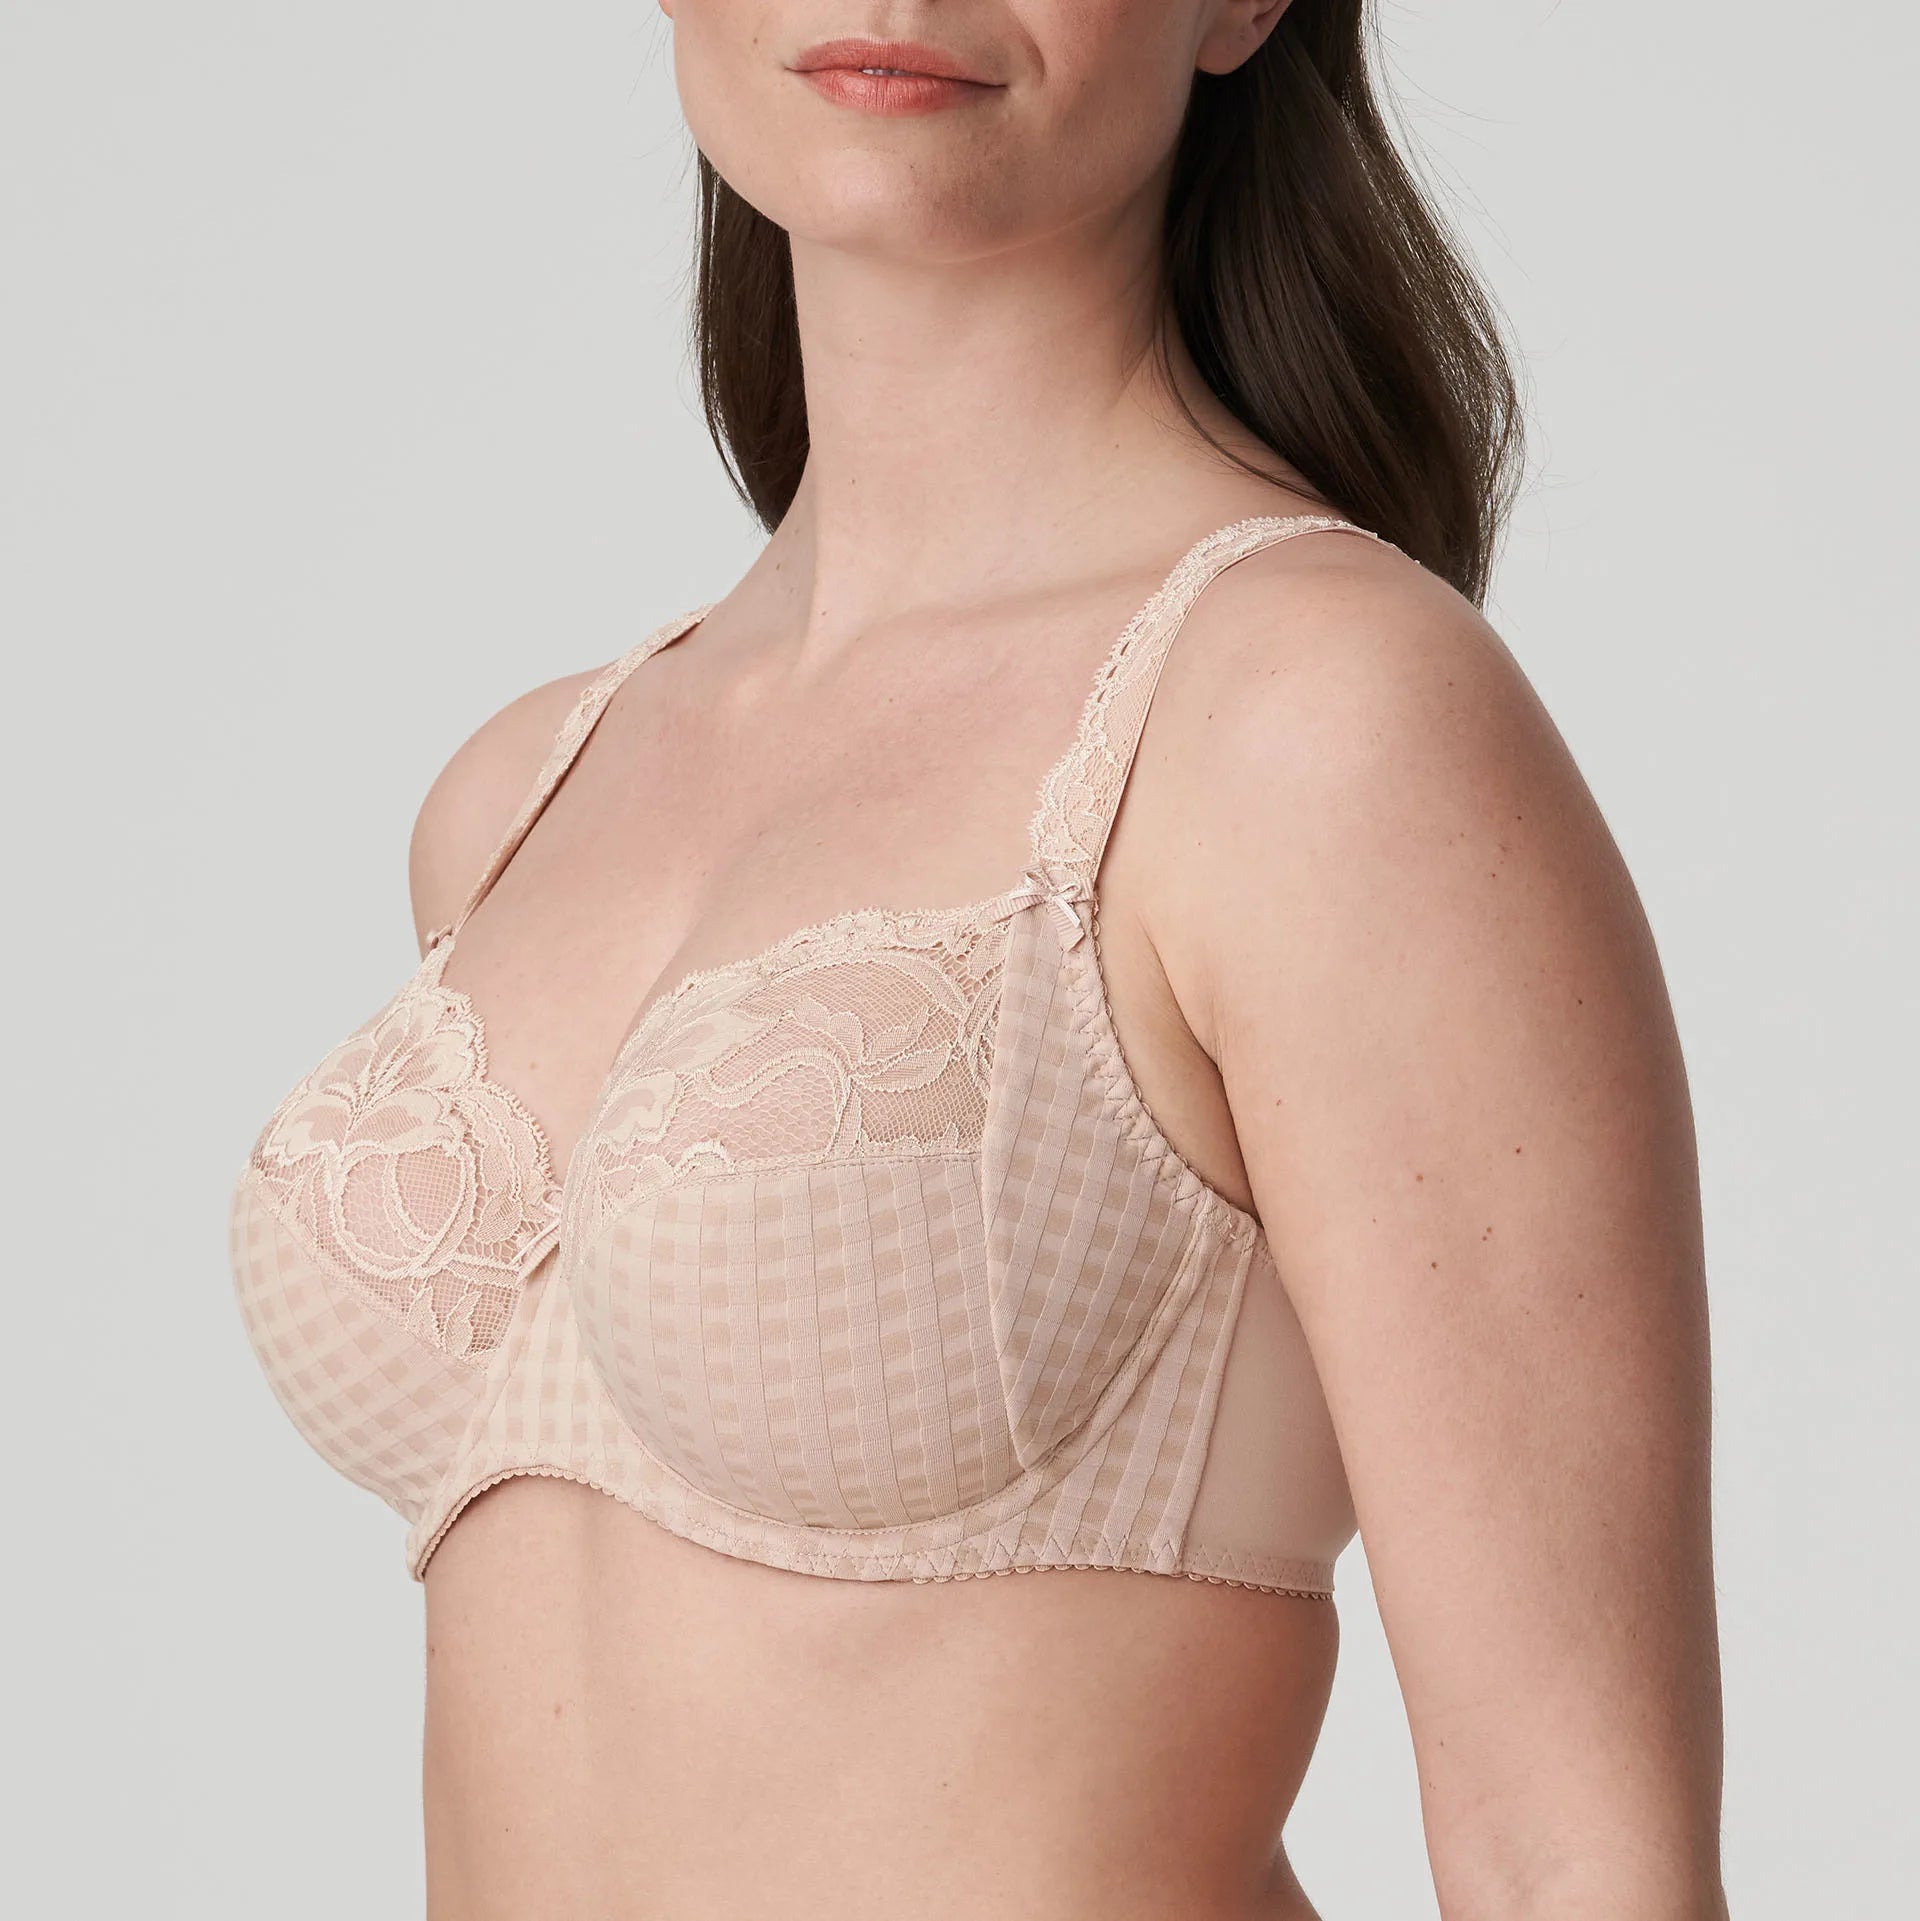 The Sensual Madison Bra by Prima Donna in Cafe Latte